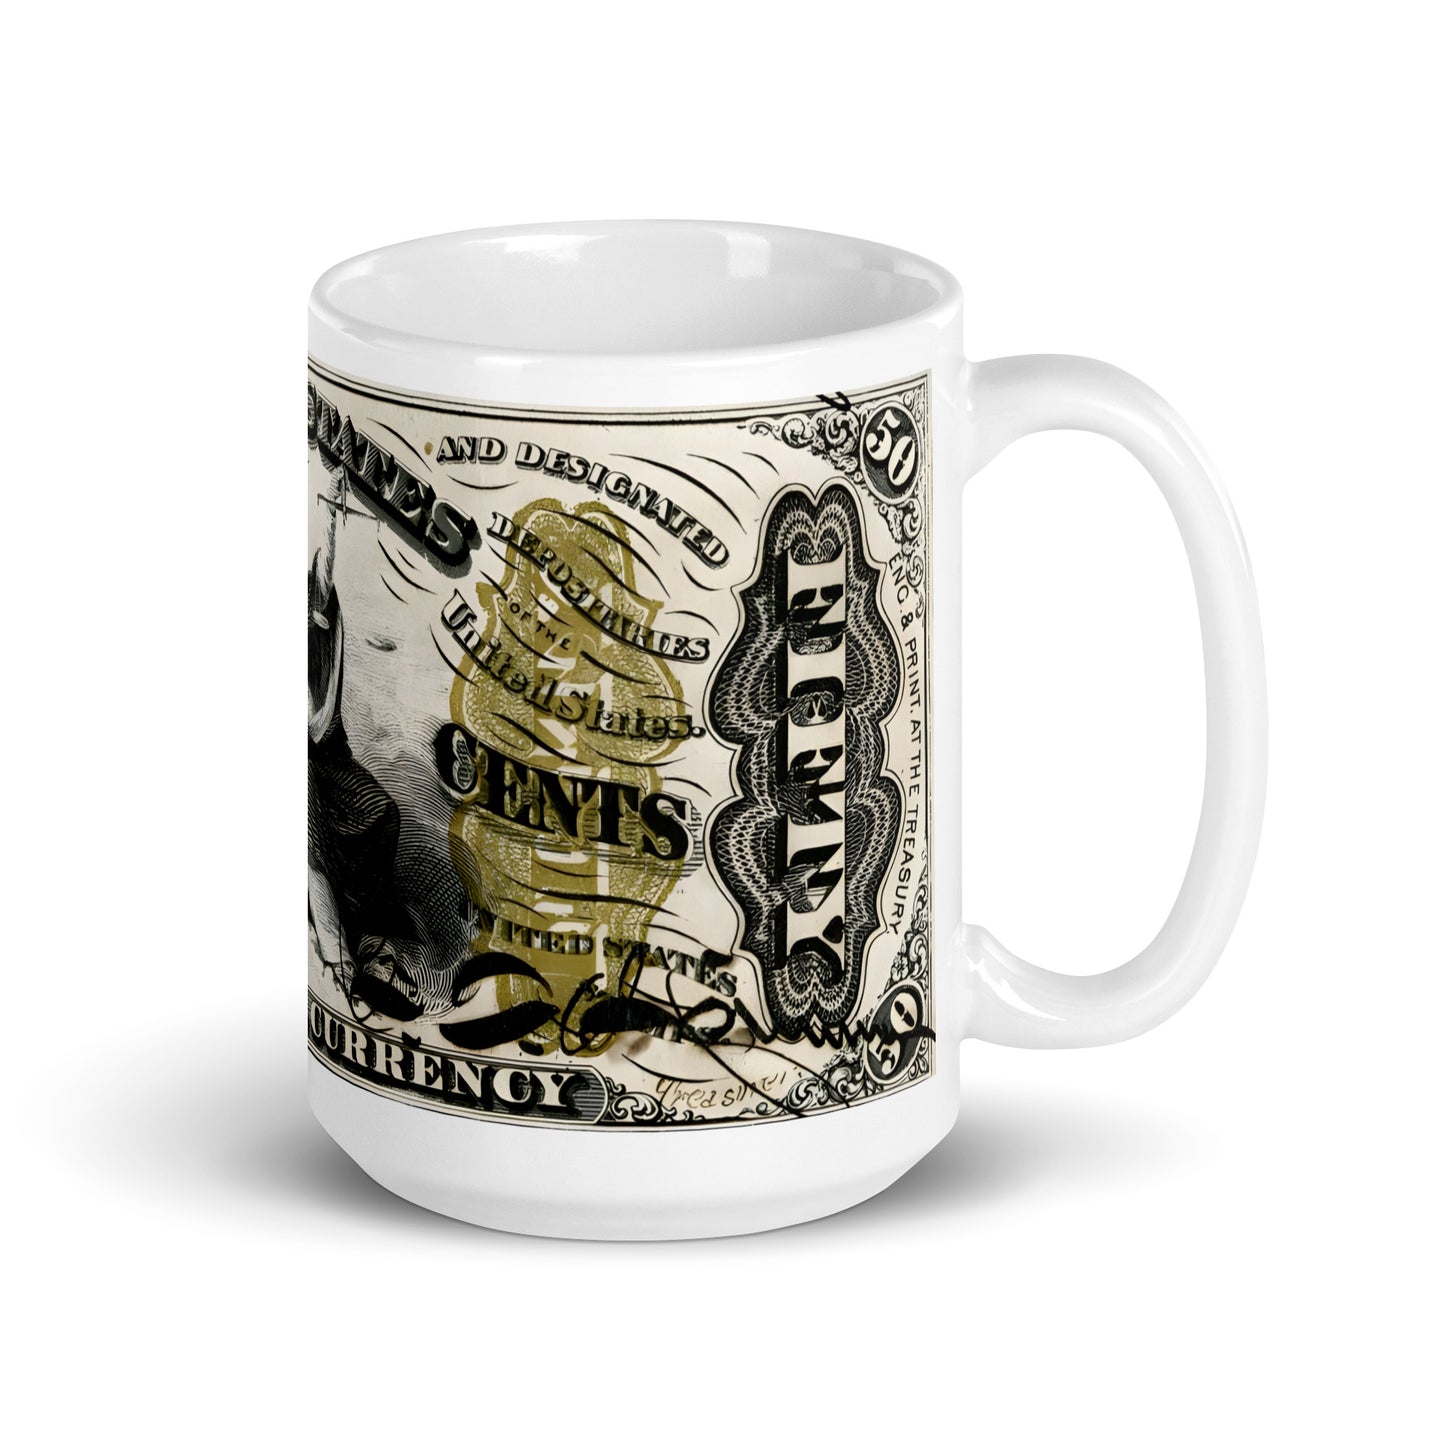 50 Cents 3RD Issue Fractional Currency (Justice) Edition - Classic Currency Collector's Mug